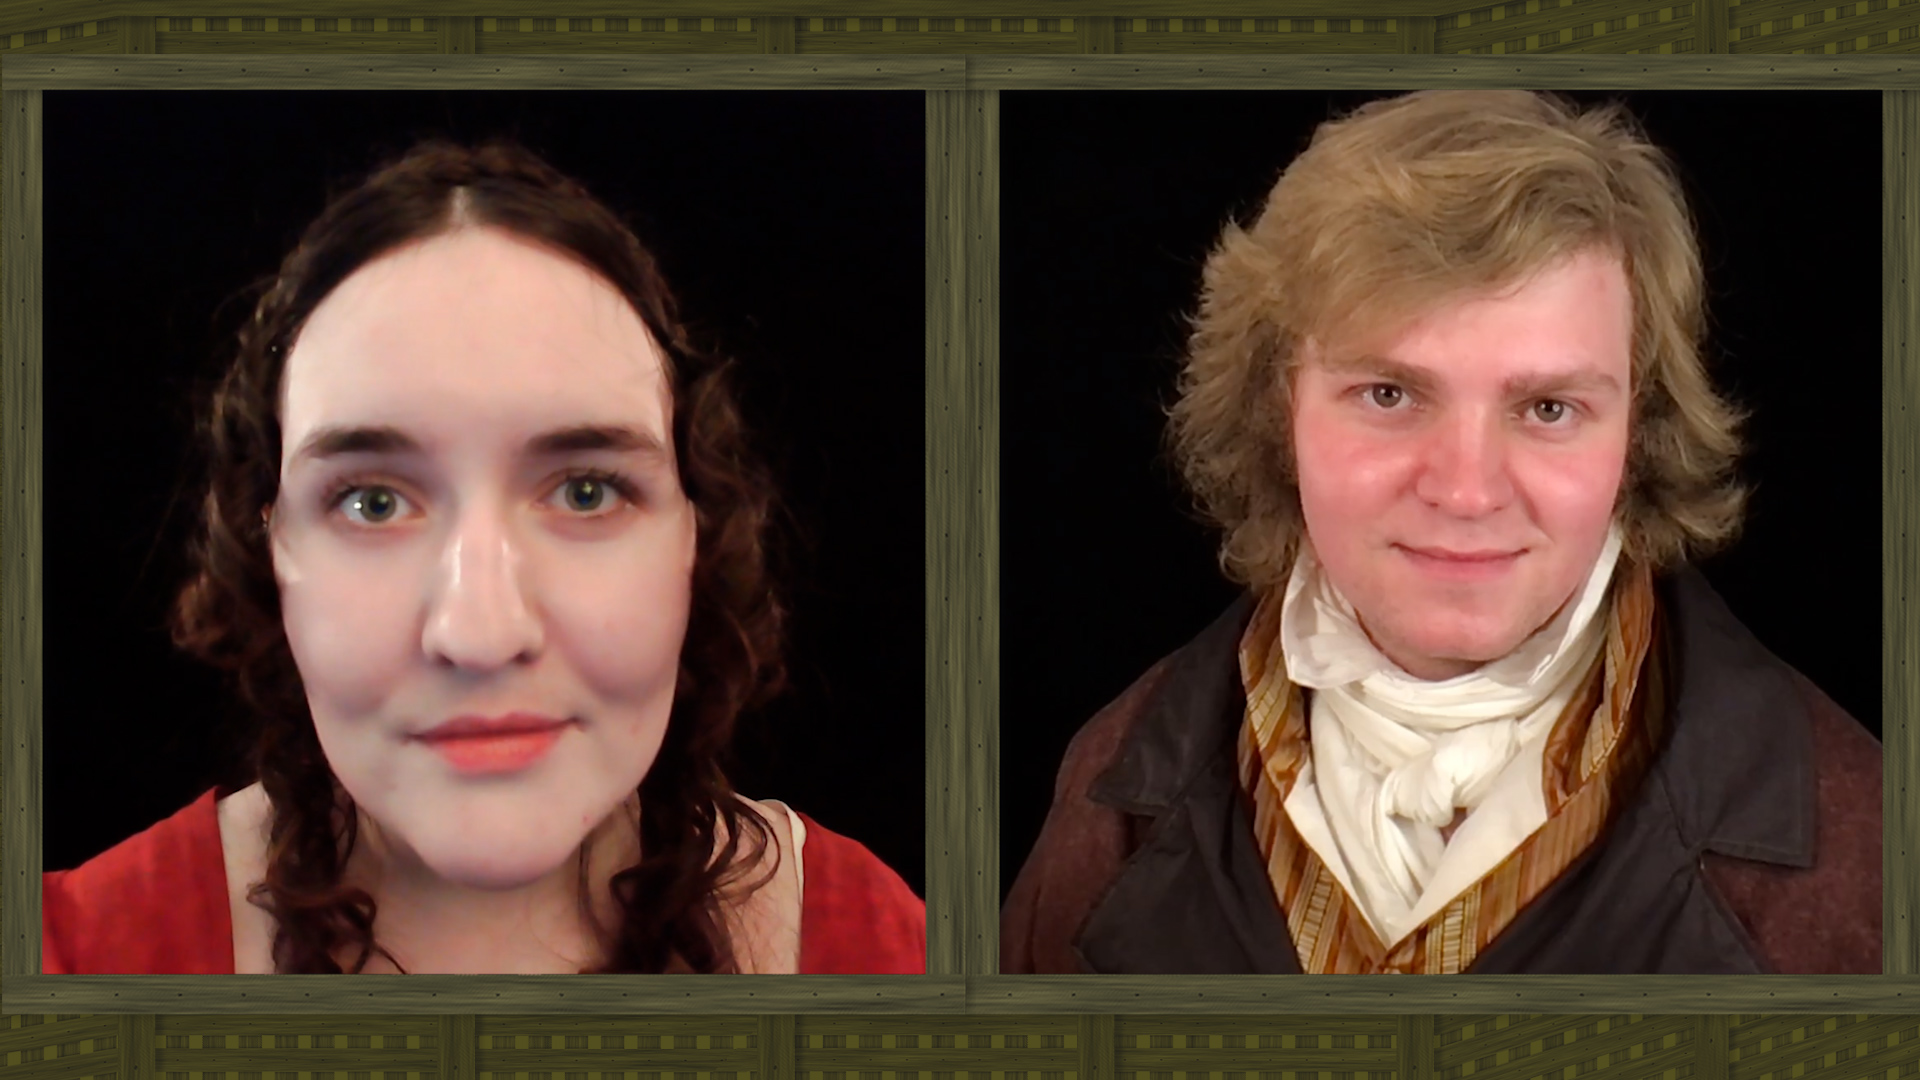 The cast virtually performing the scene: Lizzy and Darcy